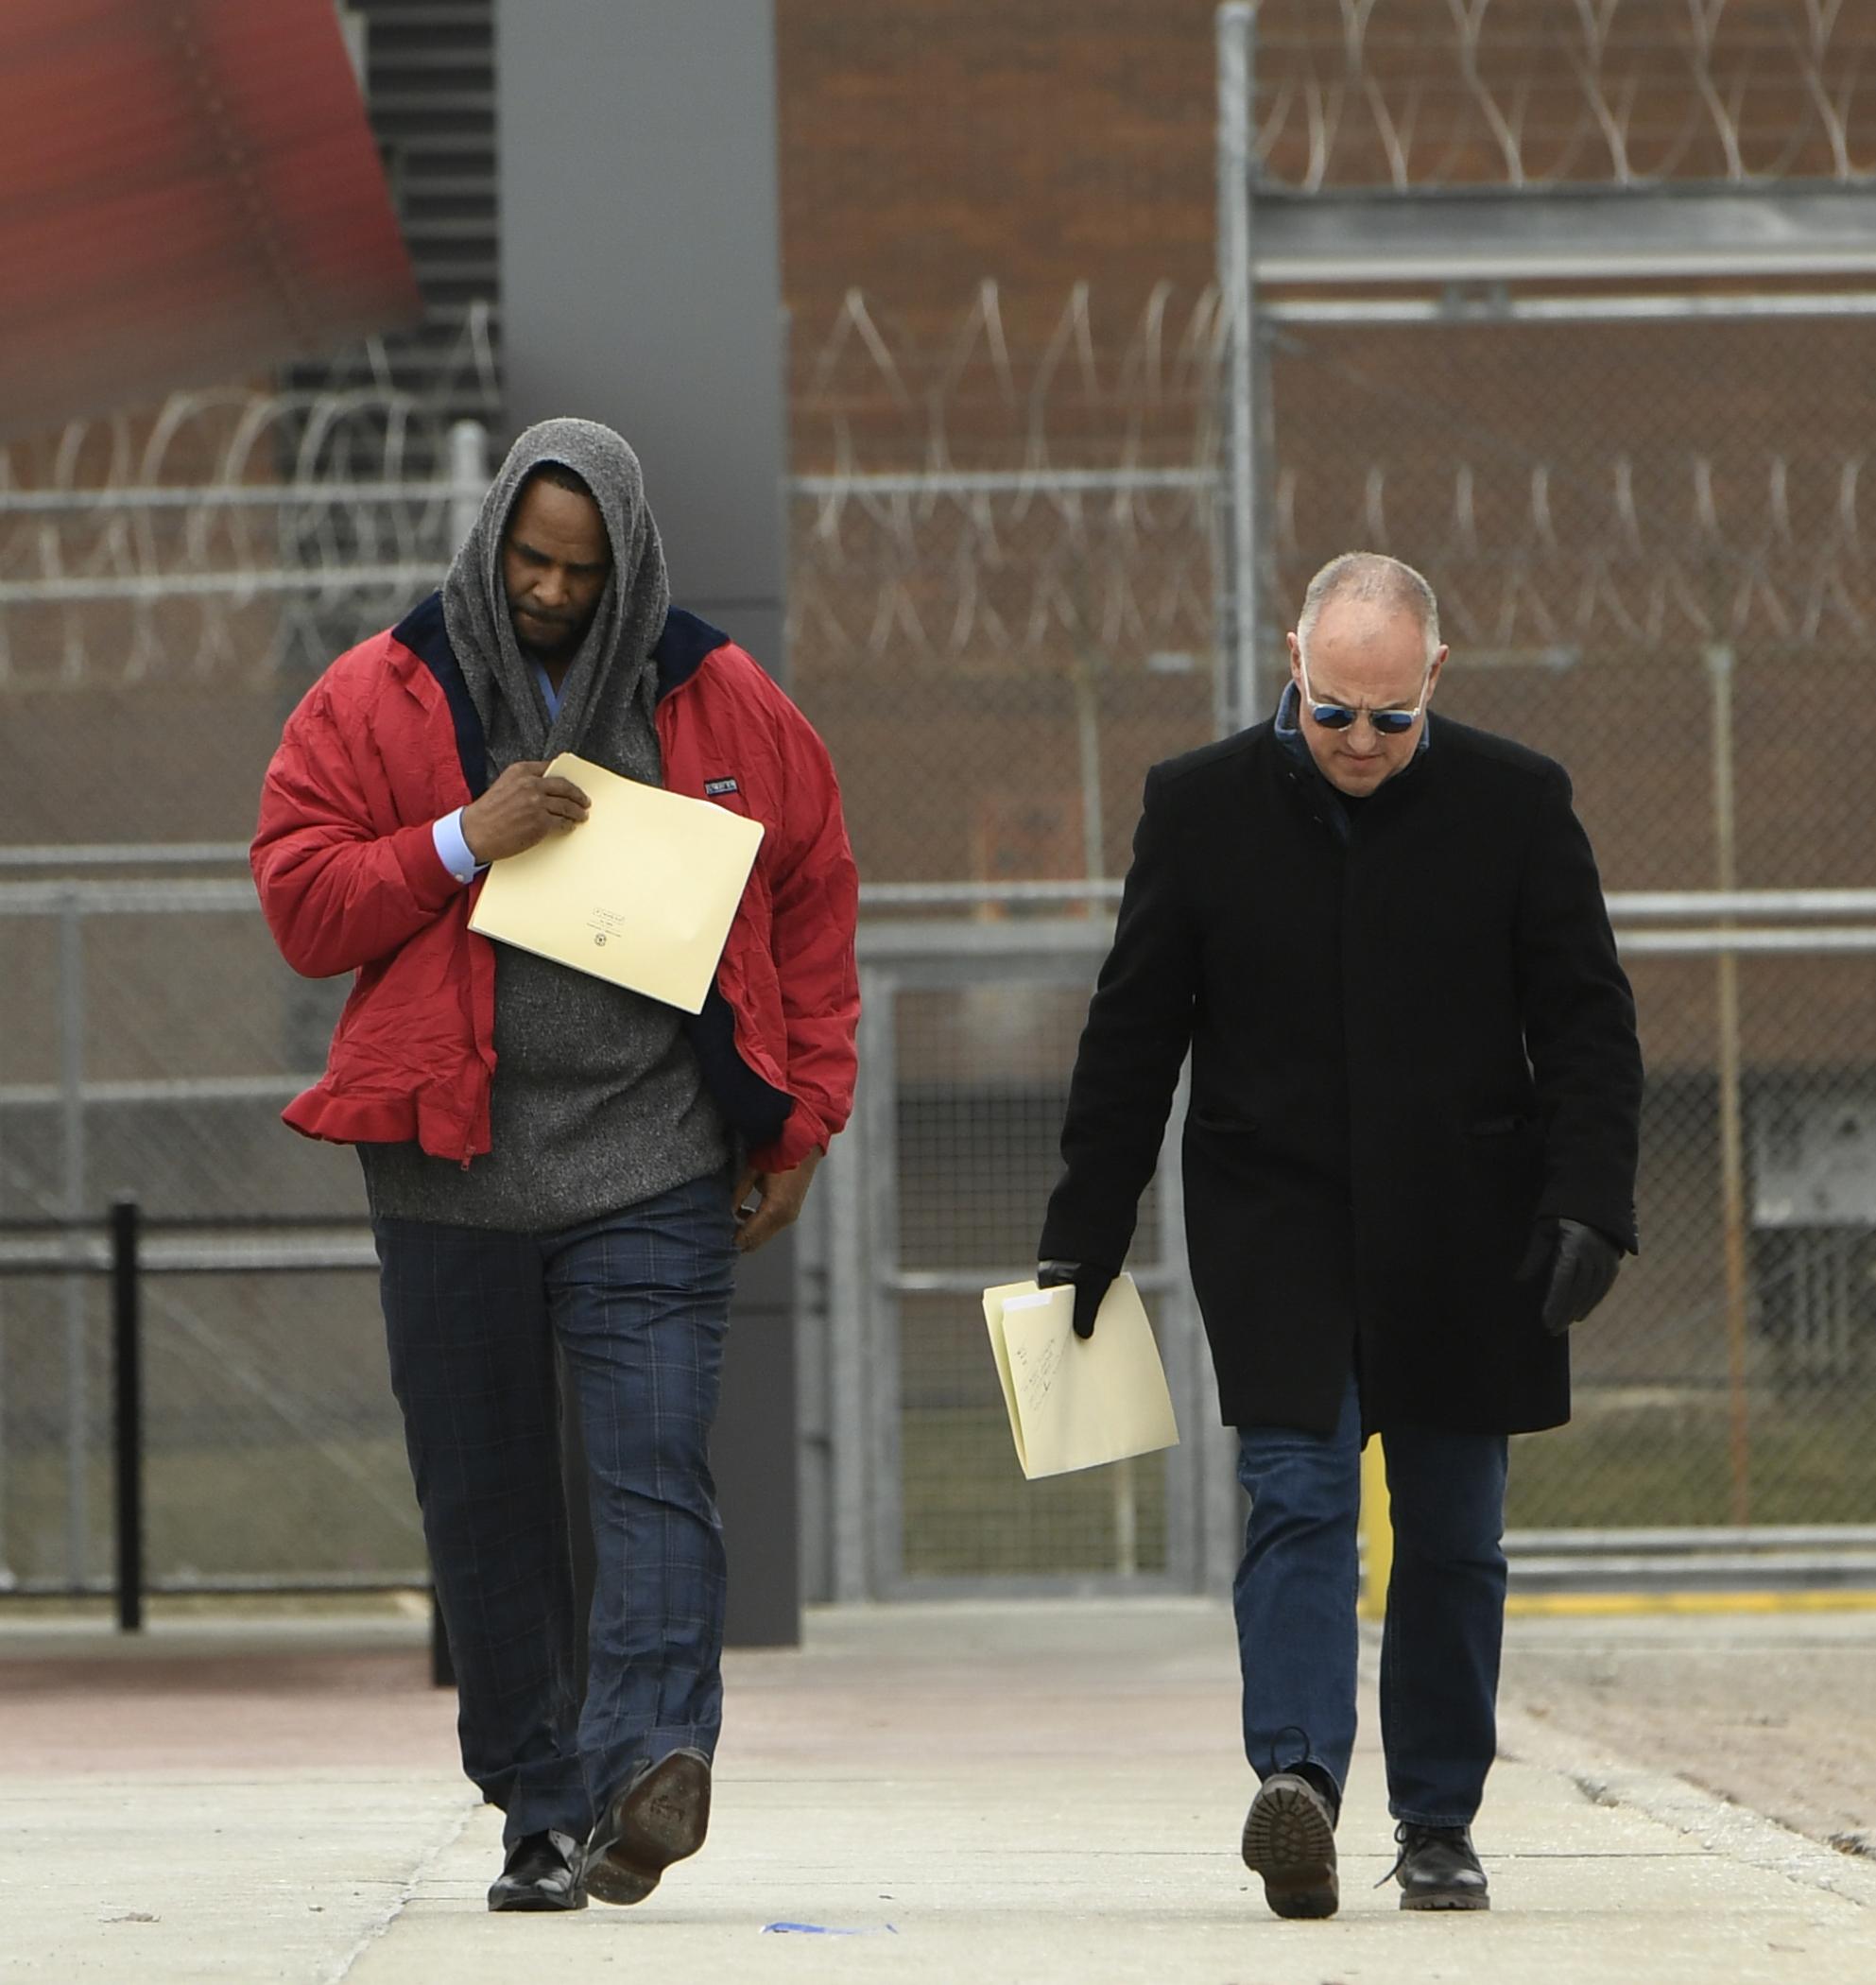 Singer R. Kelly left, walks with his attorney Steve Greenberg right, after being released from Cook County Jail, March 9, 2019, in Chicago. (AP Photo / Paul Beaty)